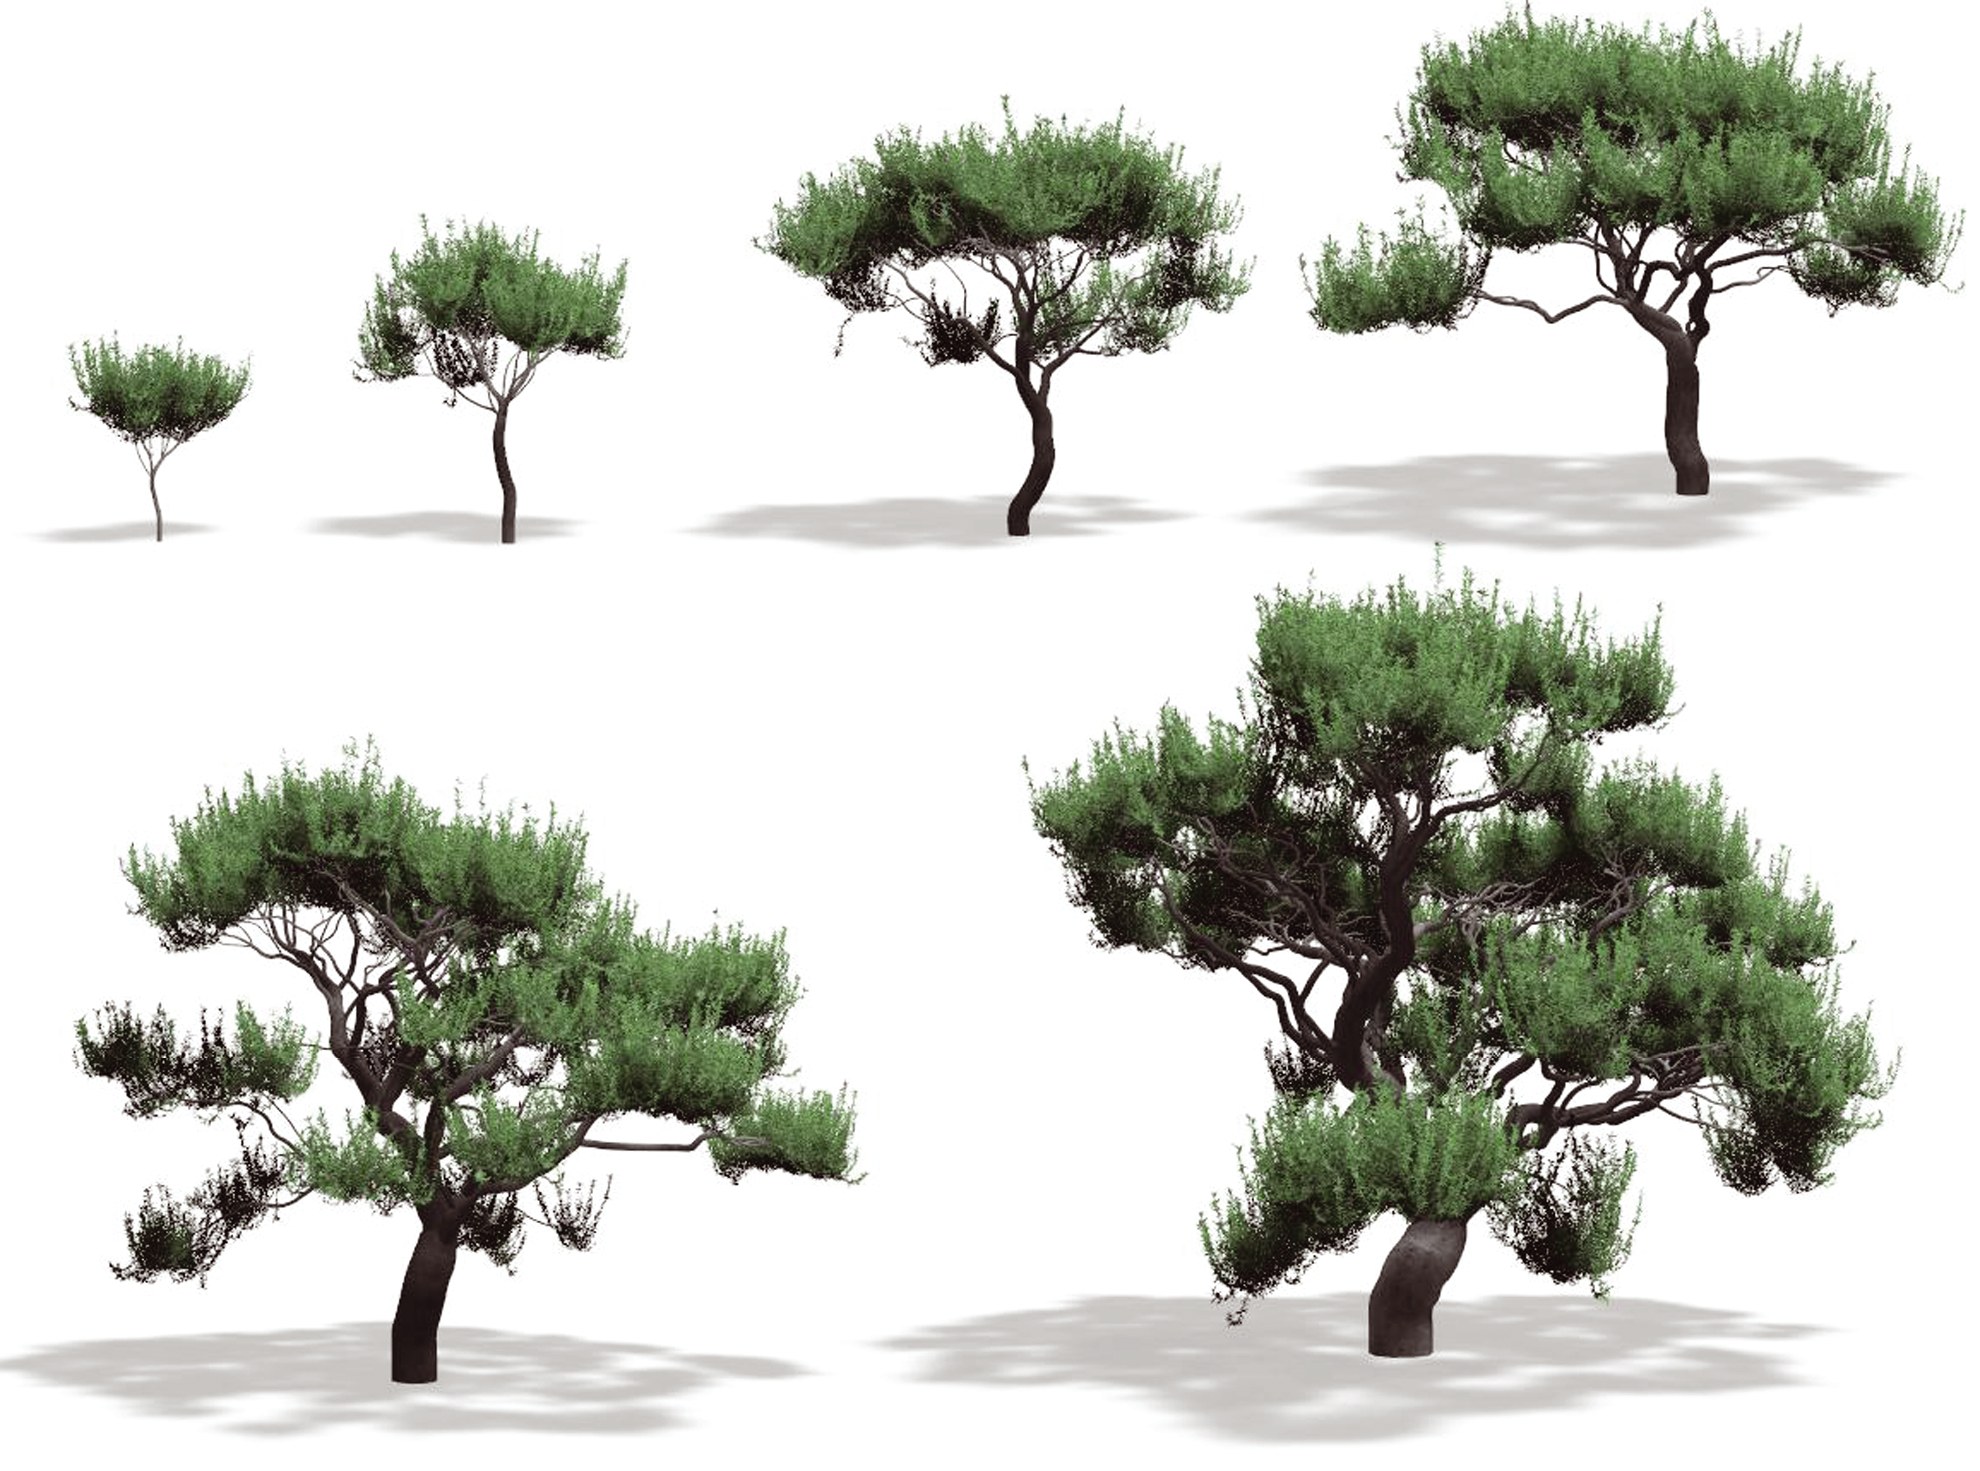 Inverse Procedural Modelling of Trees